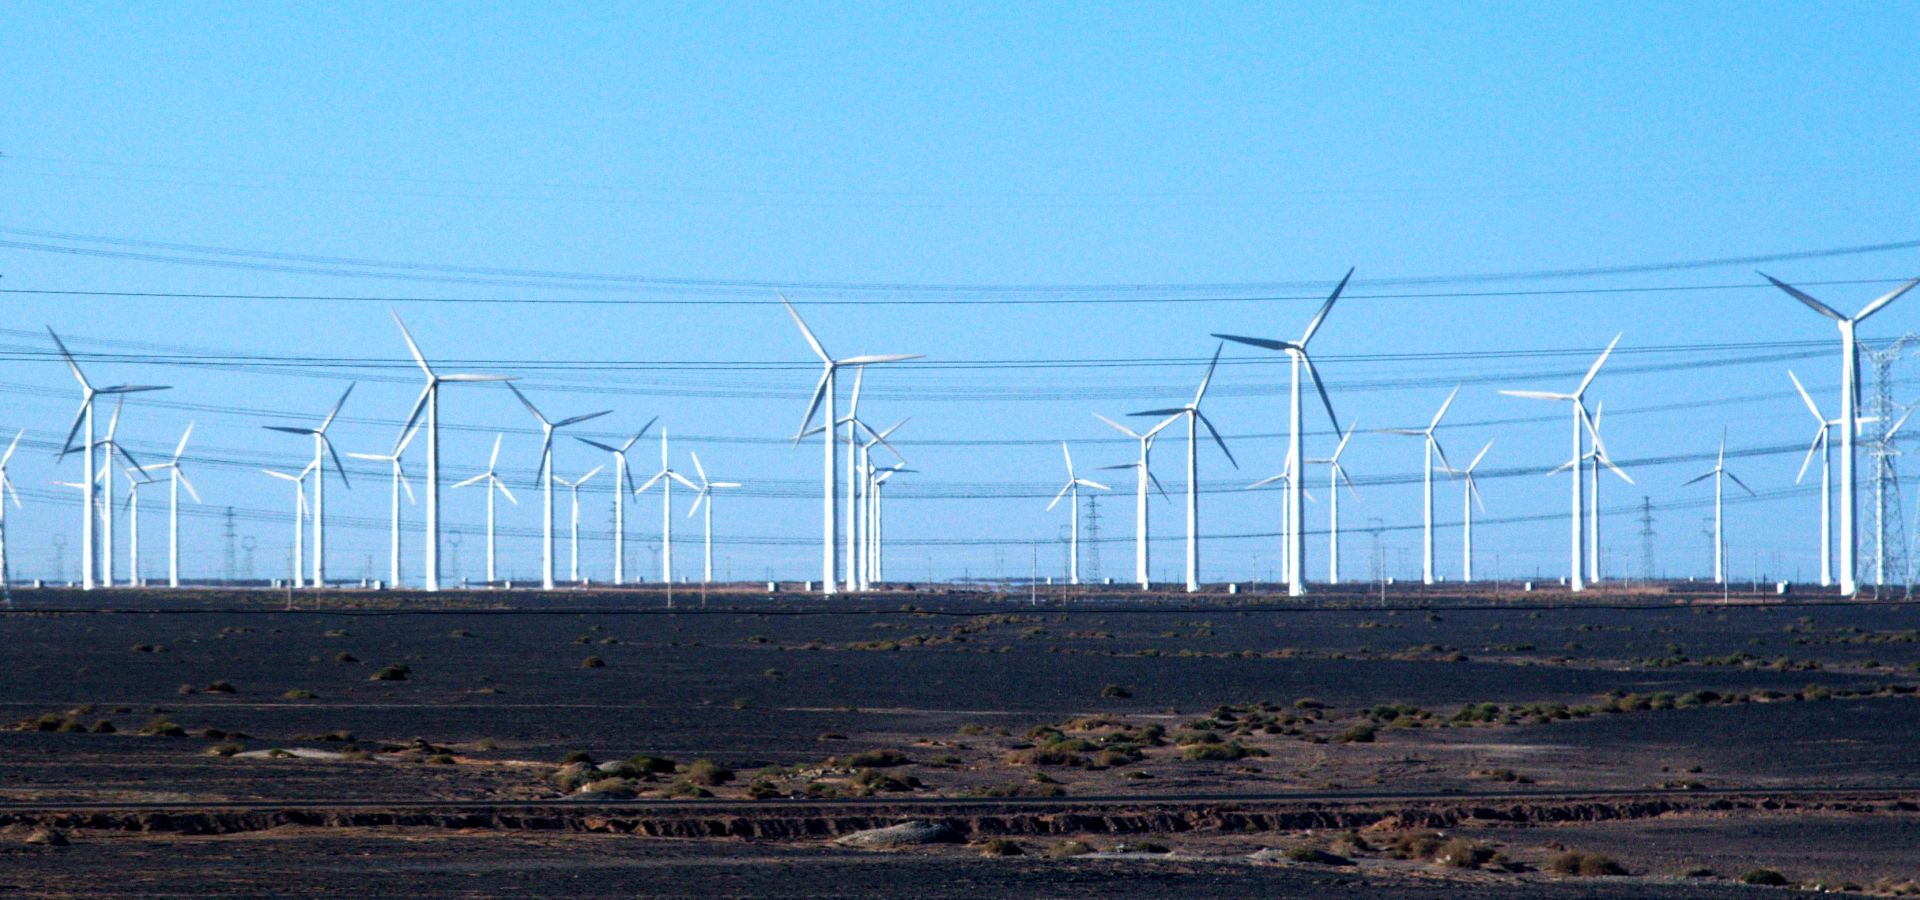 More than 200 Windturbines at Guazhou